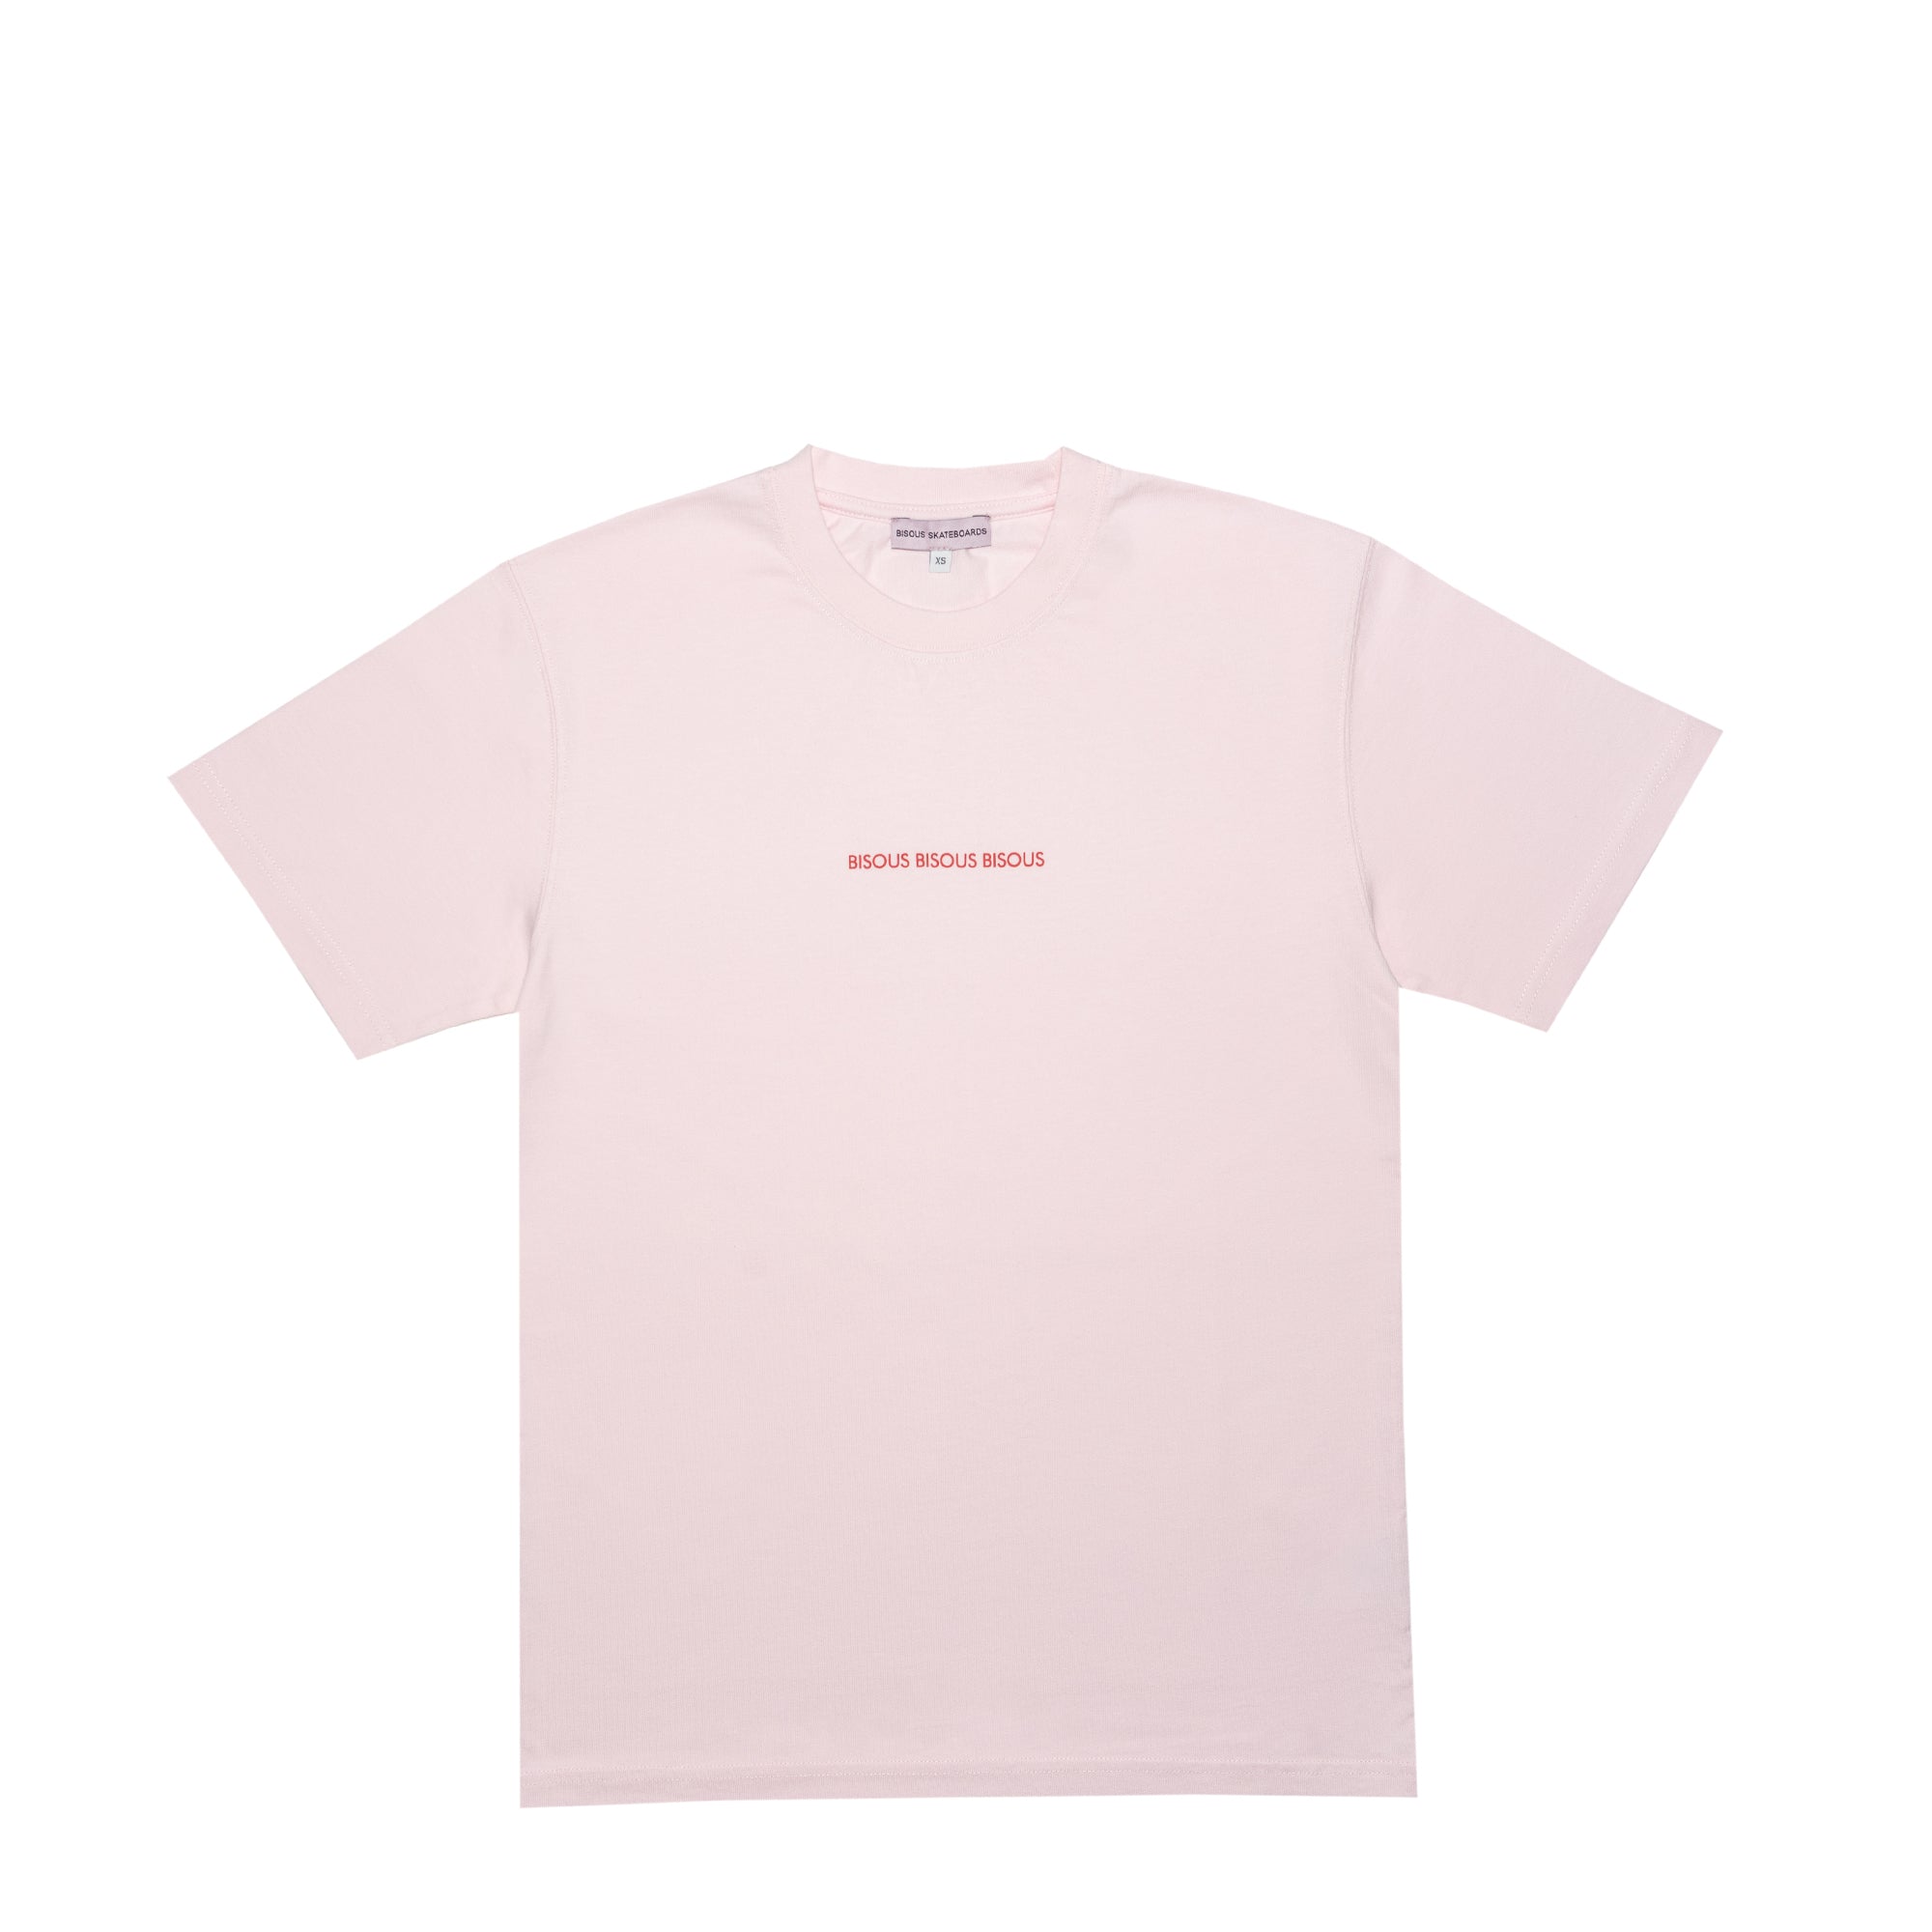 T-shirts Bisous Bisous Bisous Light Pink